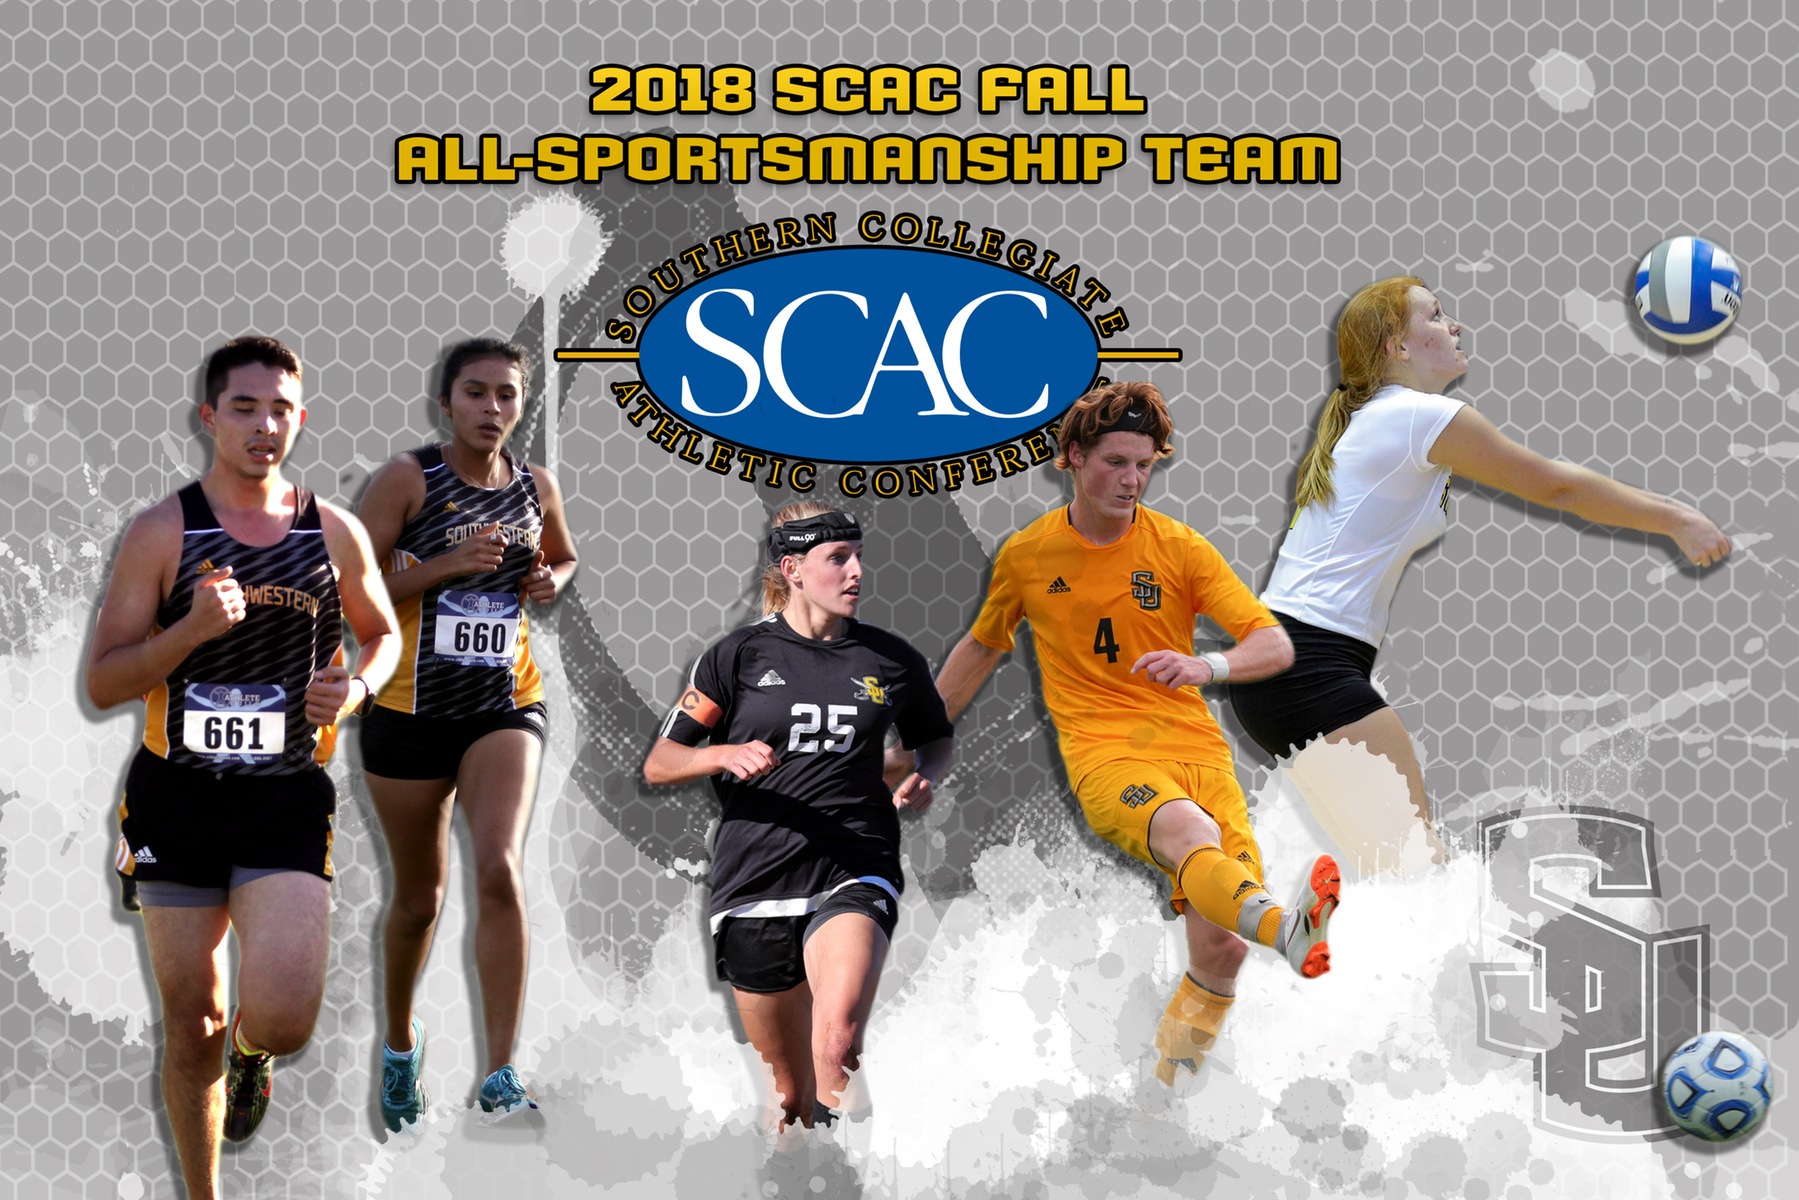 Five Student-Athletes Selected for SCAC Fall All-Sportsmanship Team